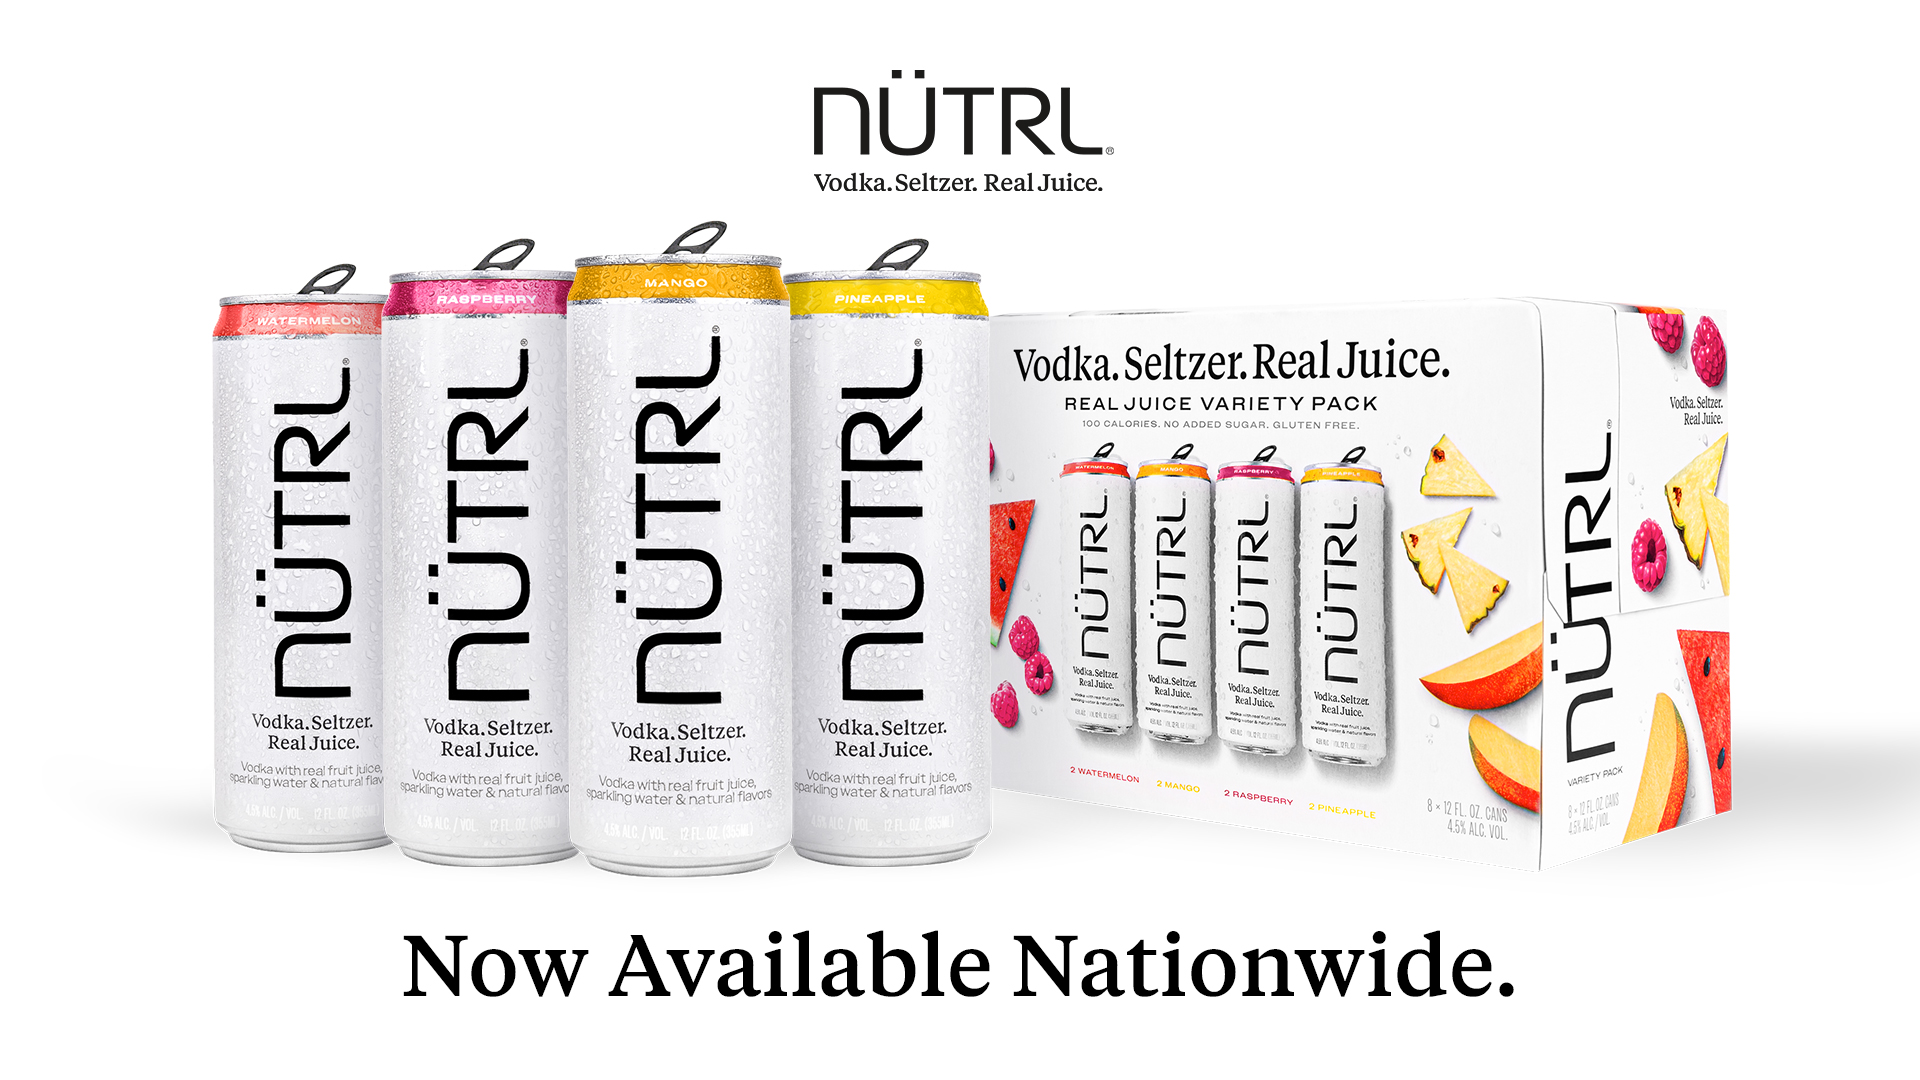 Hard Seltzer Doesn't Have To Be Hard – Nütrl Vodka Seltzer Launches Nationwide With Light and Refreshing Taste Rooted in Simplicity